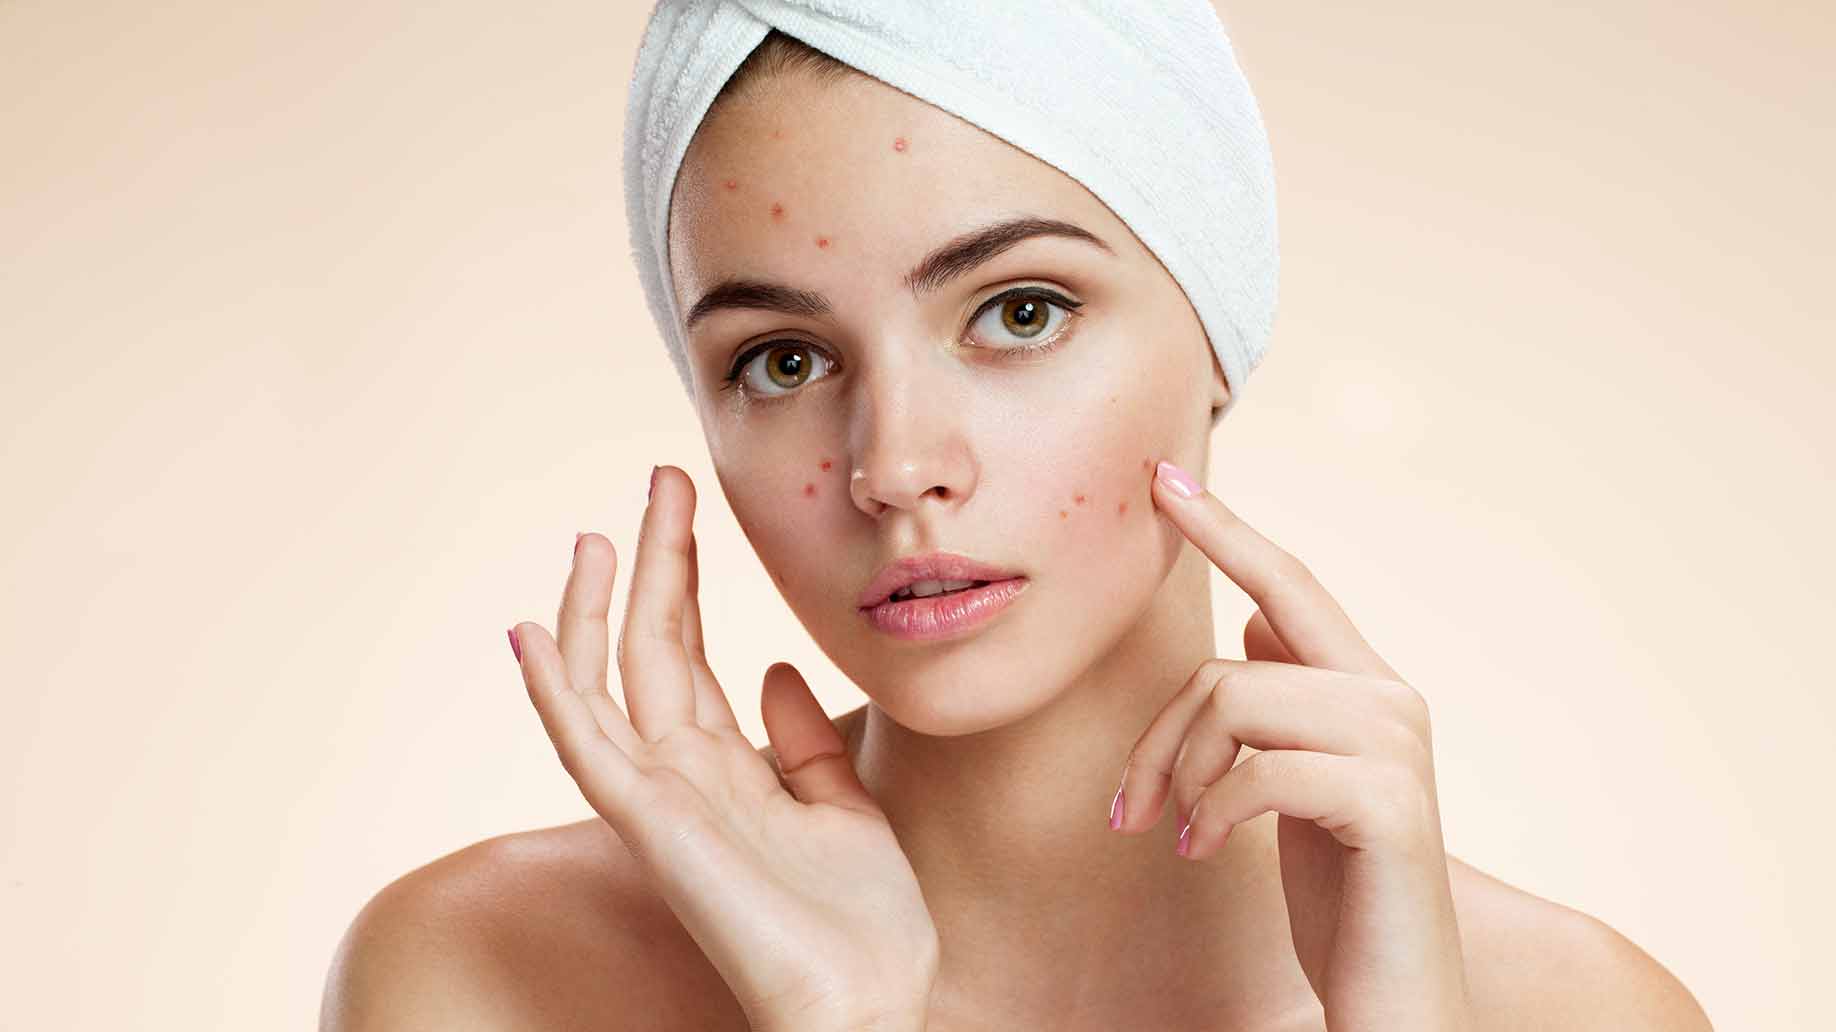 The Diet To Get Rid Of Your Acne